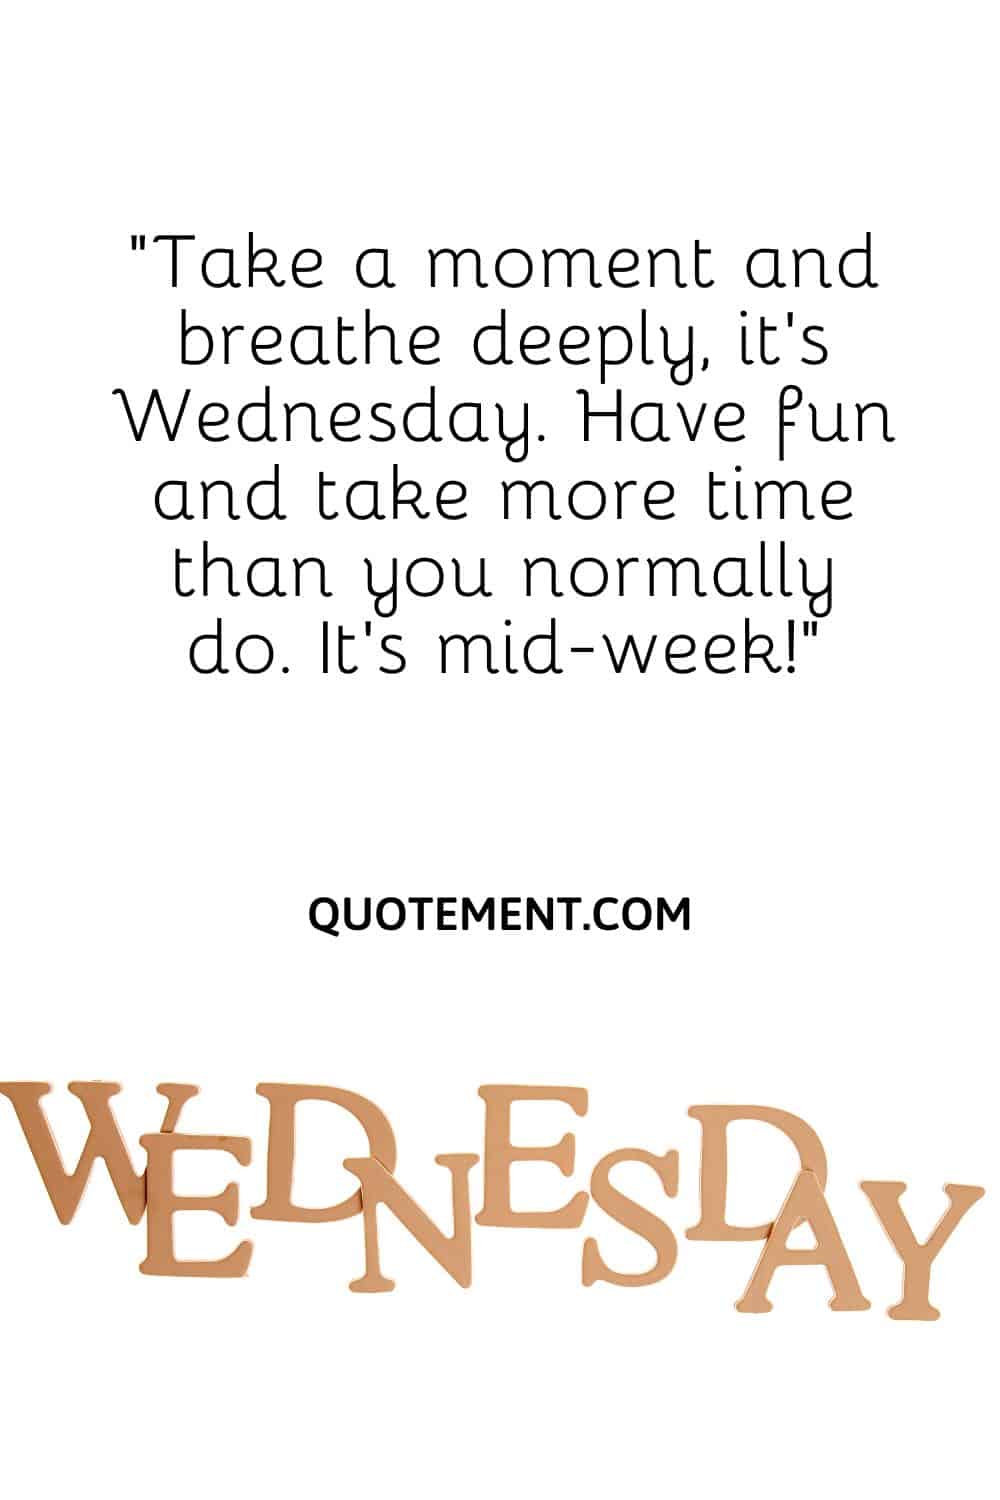 Take a moment and breathe deeply, it’s Wednesday